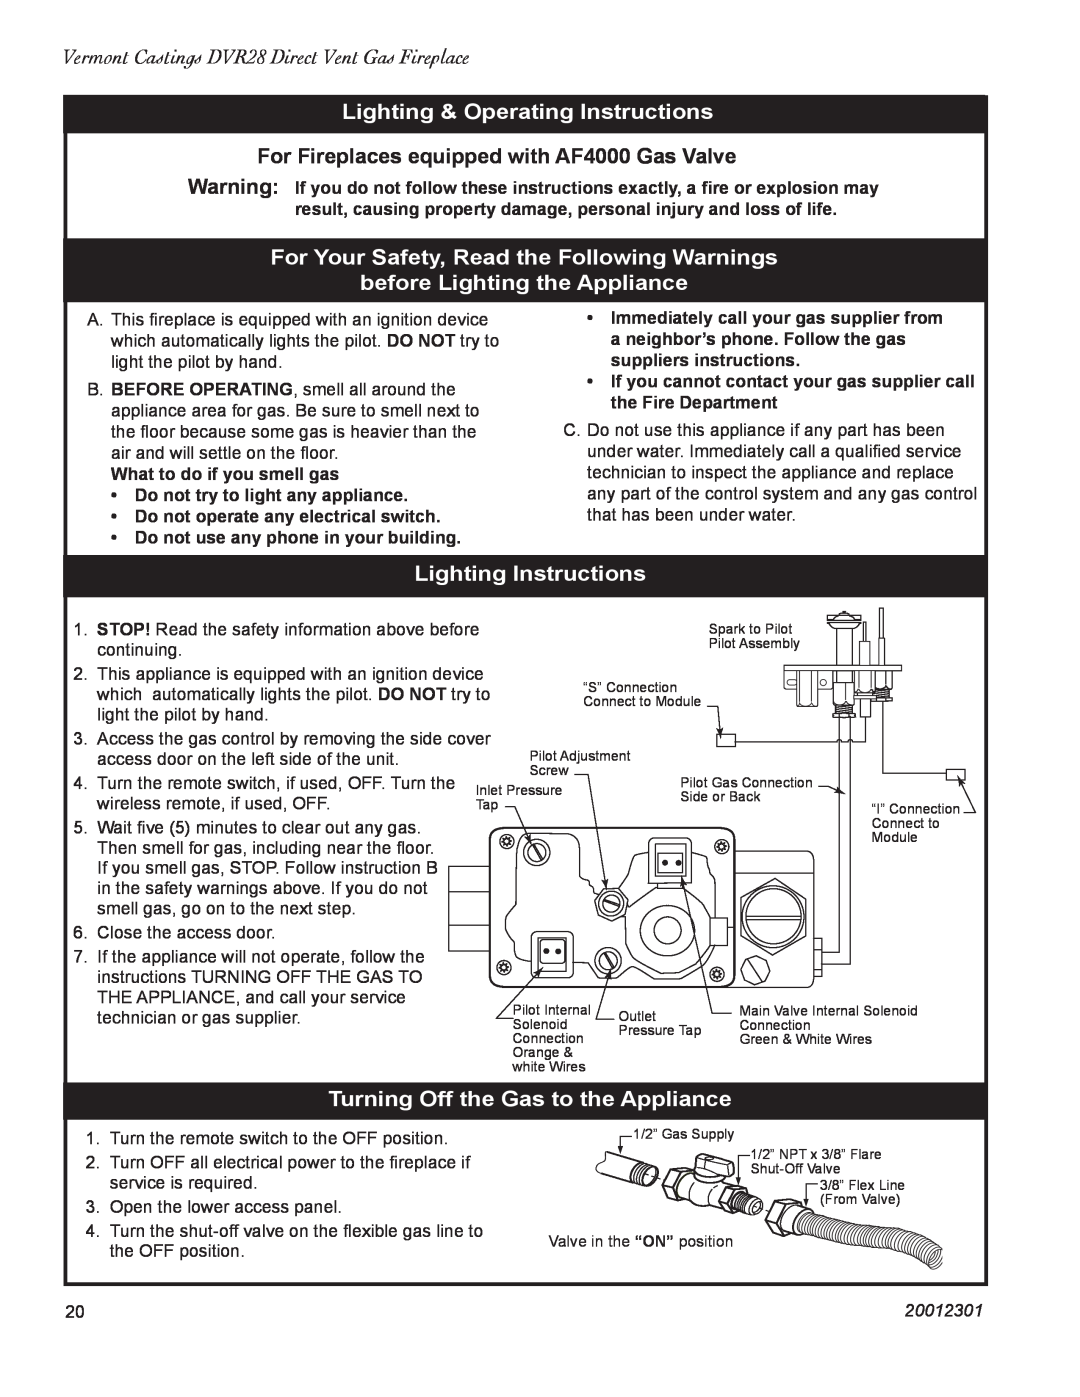 Vermont Casting DVR28IN Lighting & Operating Instructions, For Your Safety, Read the Following Warnings, 20012301 